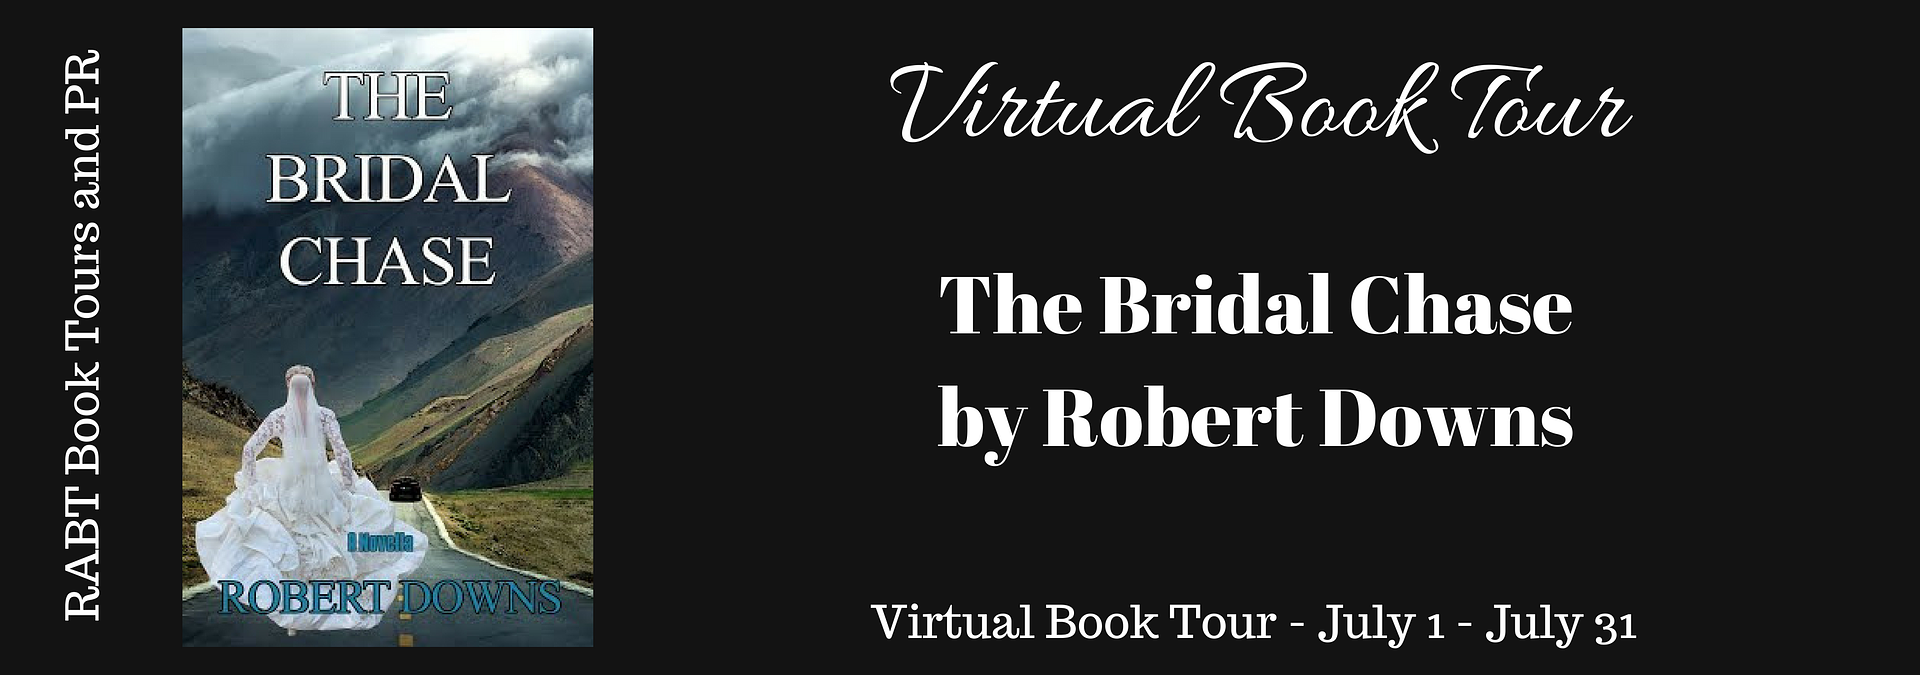 Virtual Book Tour: The Bridal Chase by Robert Downs #interview #giveaway